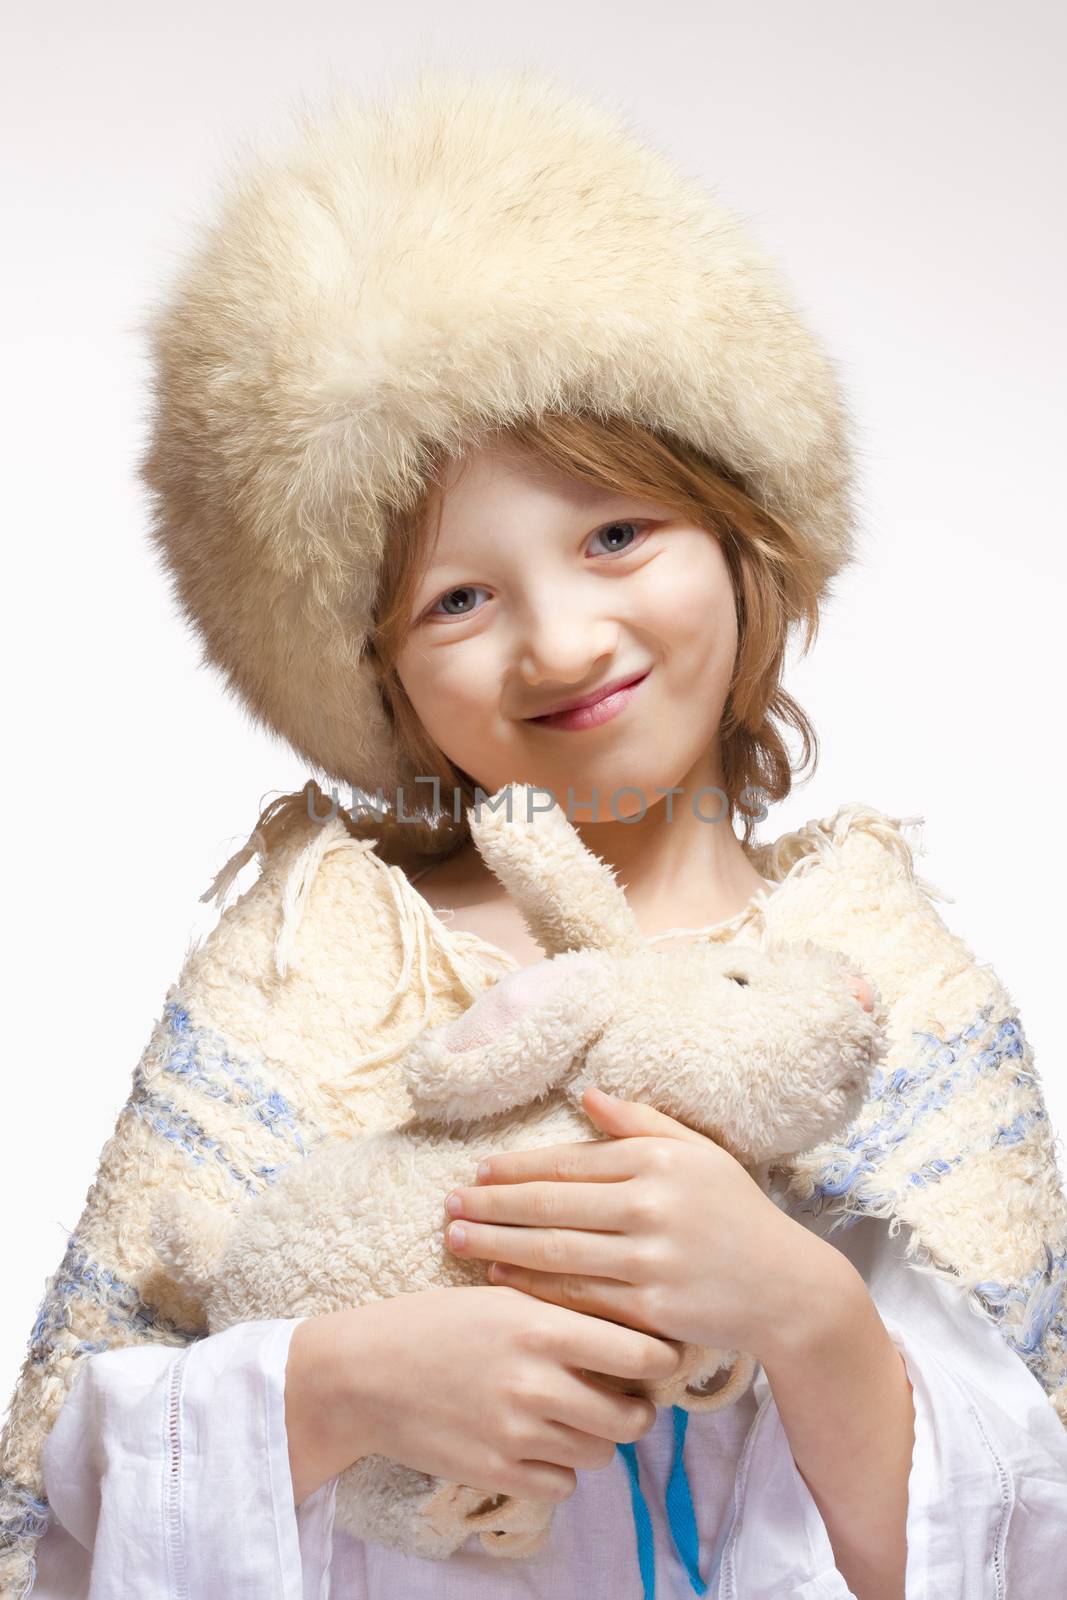 Christmas Portrait of a Boy with Fluffy Hat and Stuffed Animal